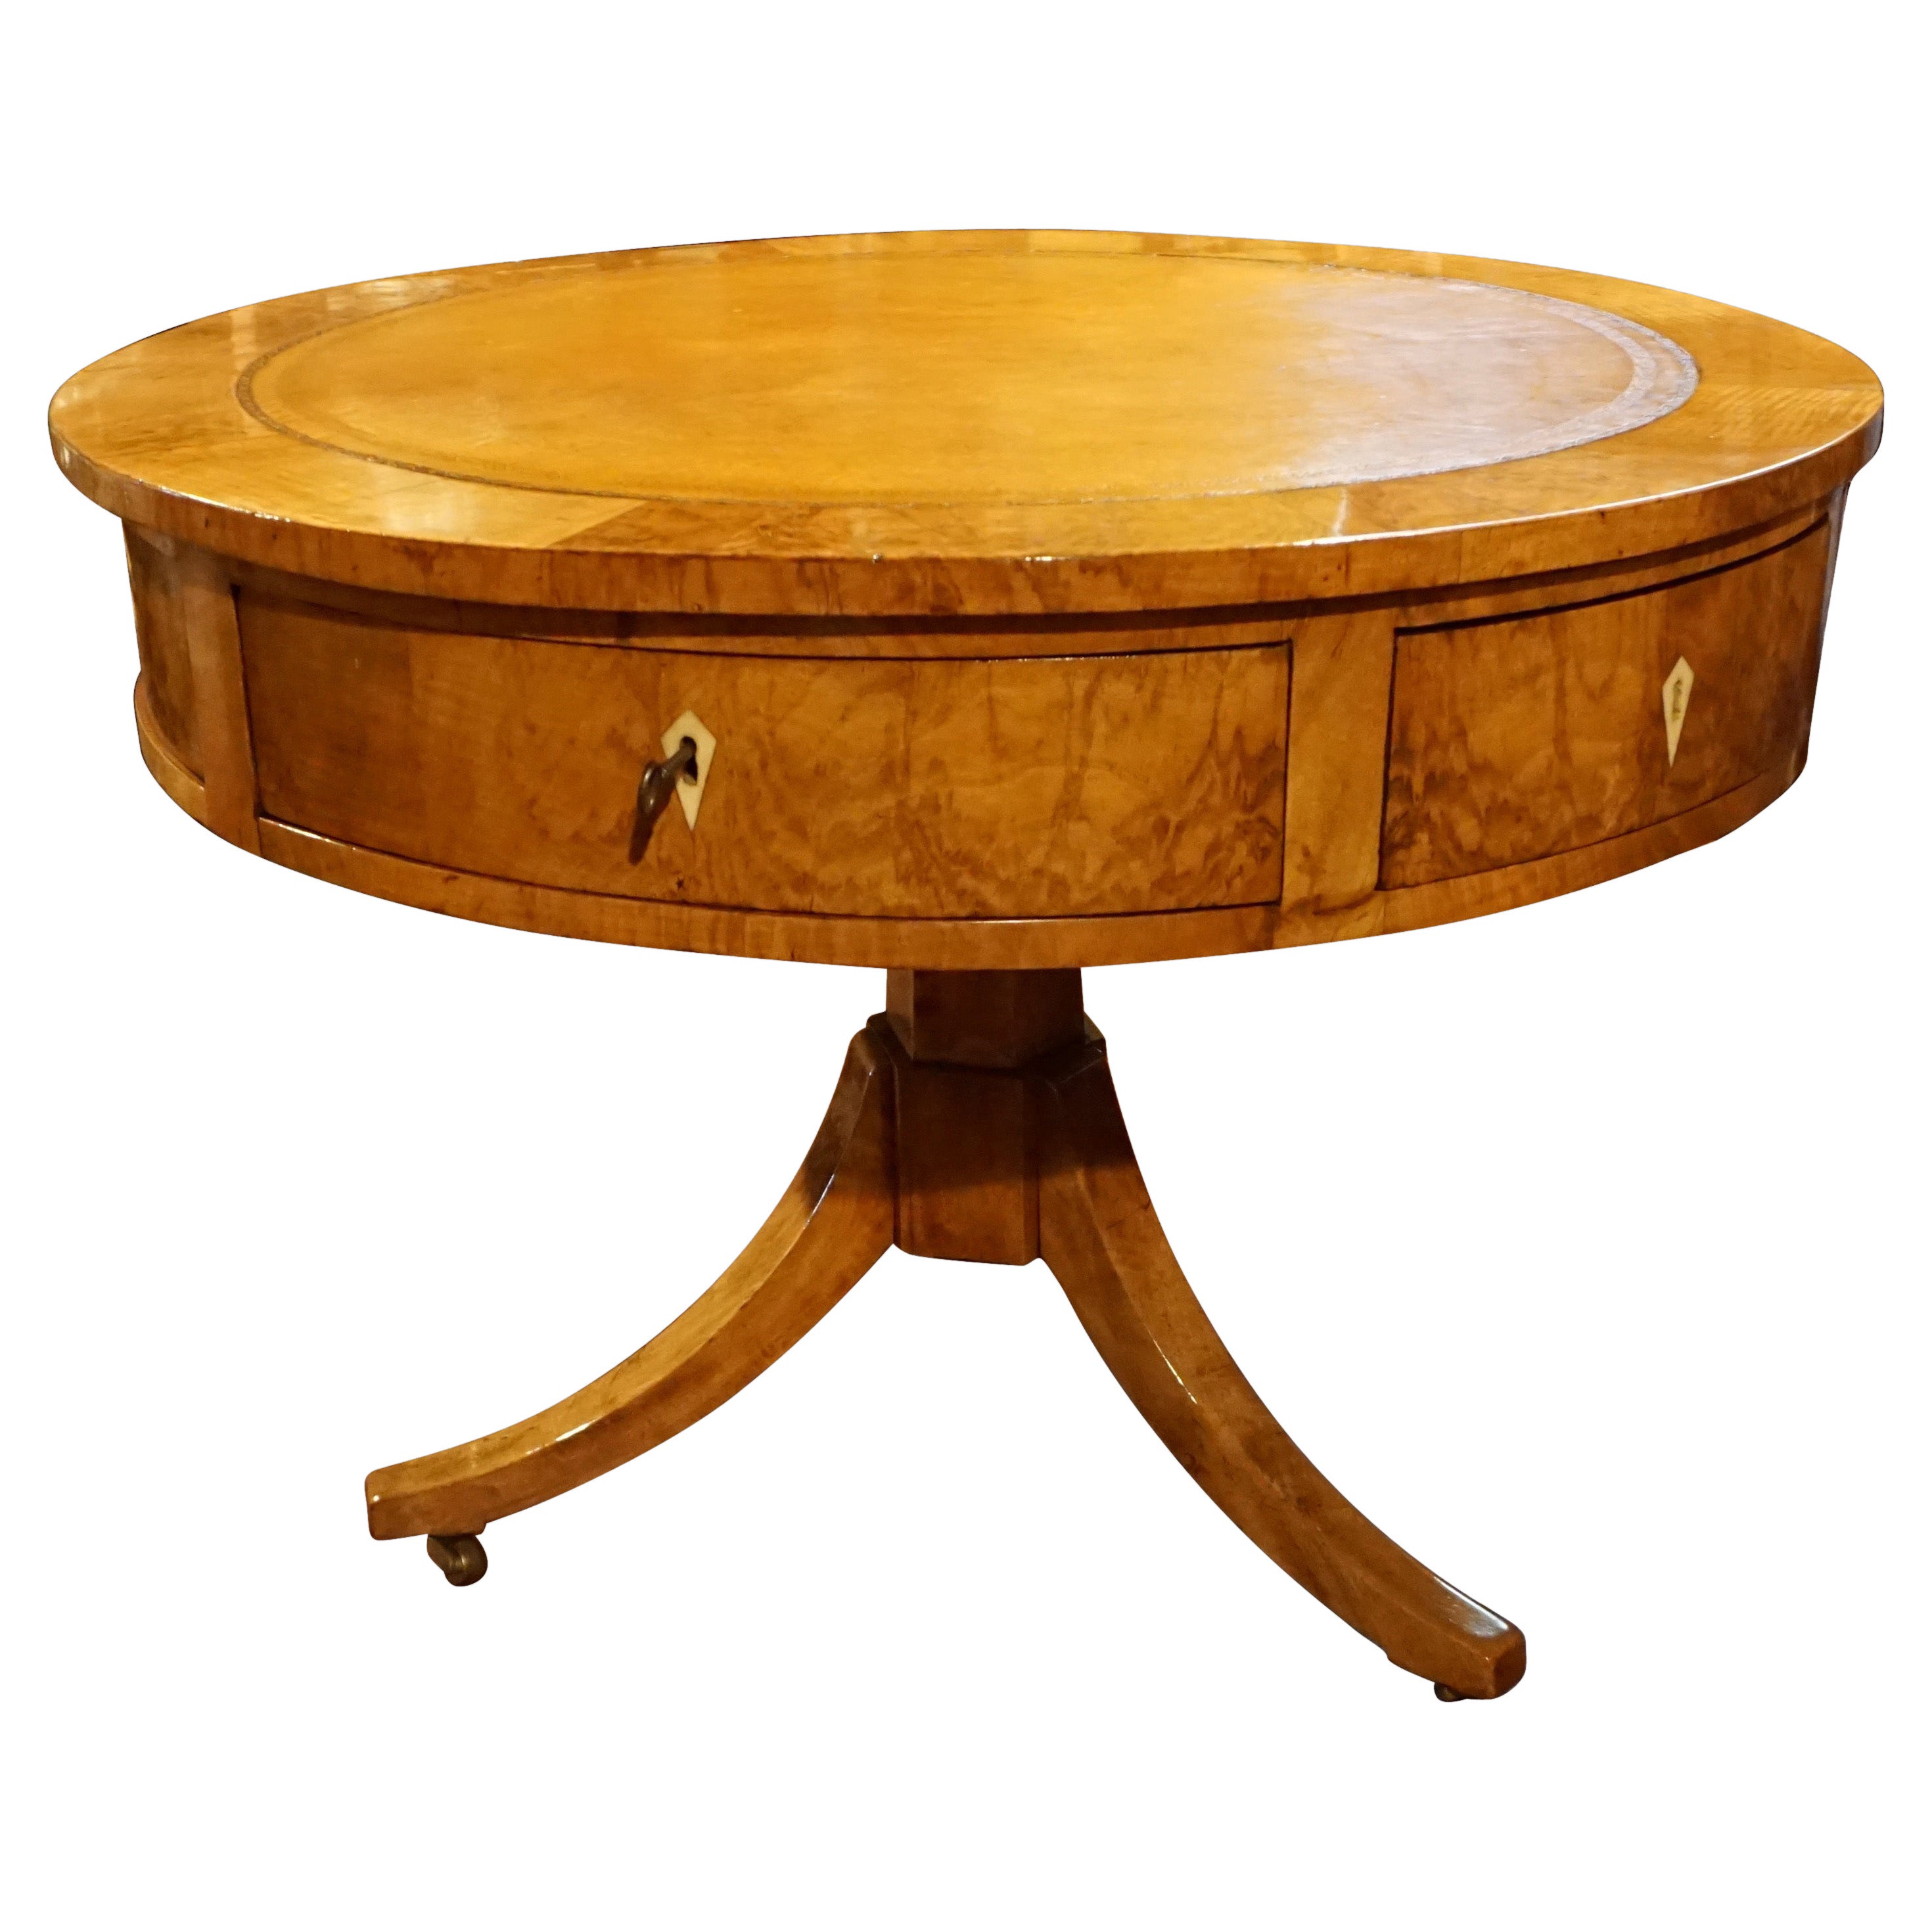 Biedermeier Fruitwood Center Table with Rotating Gilt-Tooled Leather Top